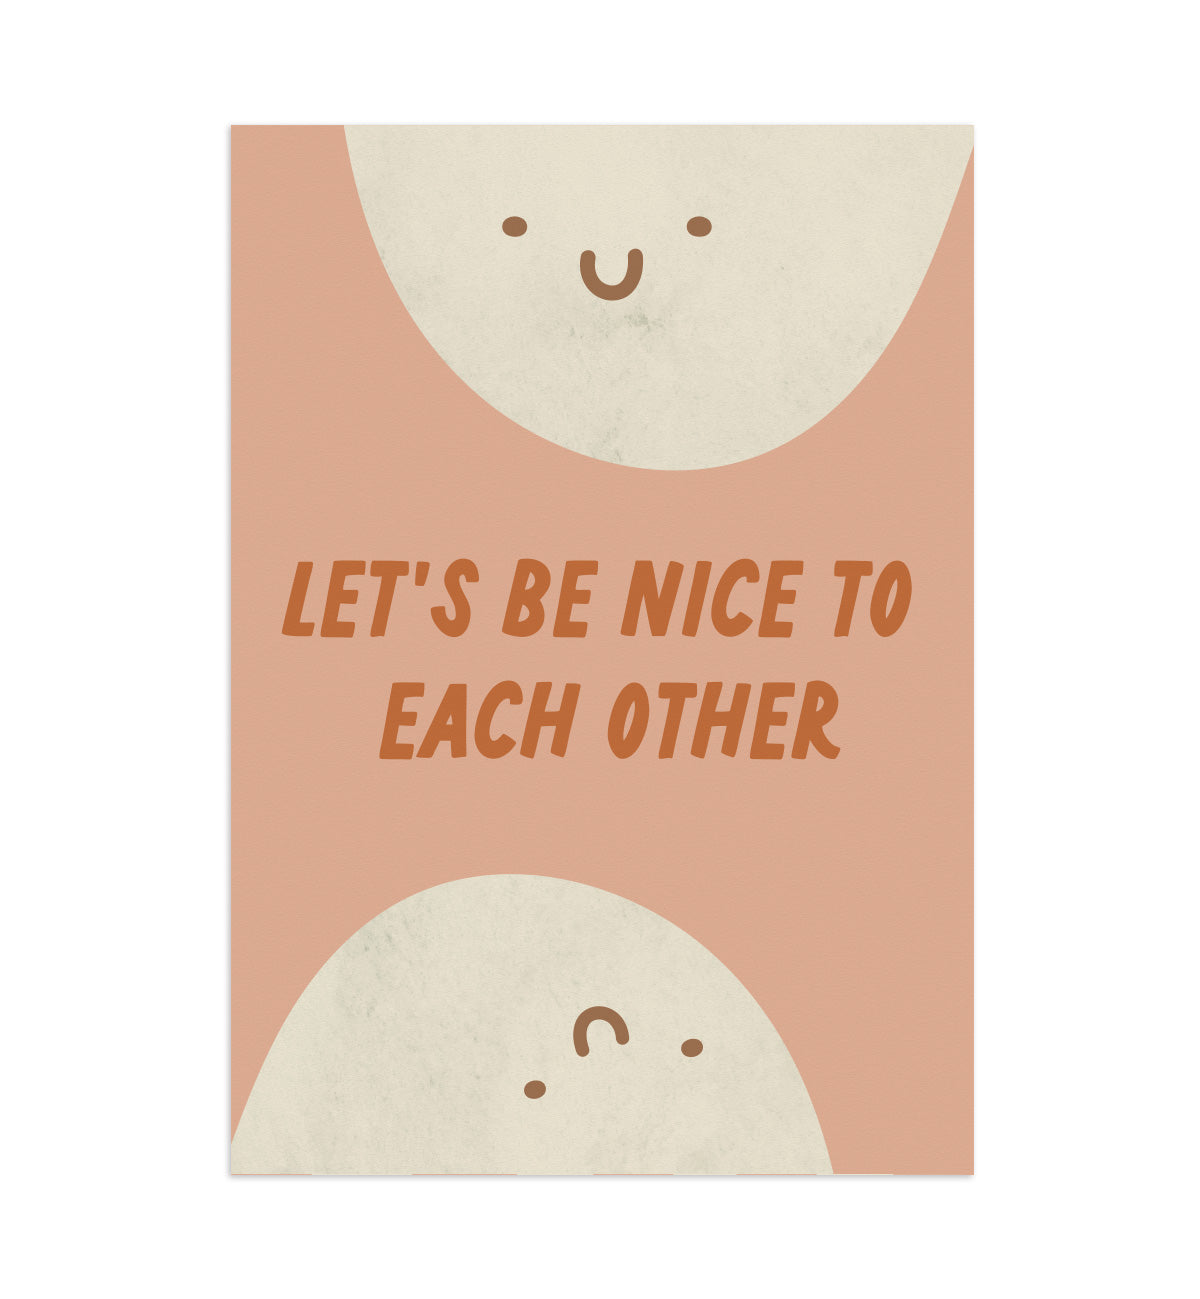 Plakat Let's be nice to each other